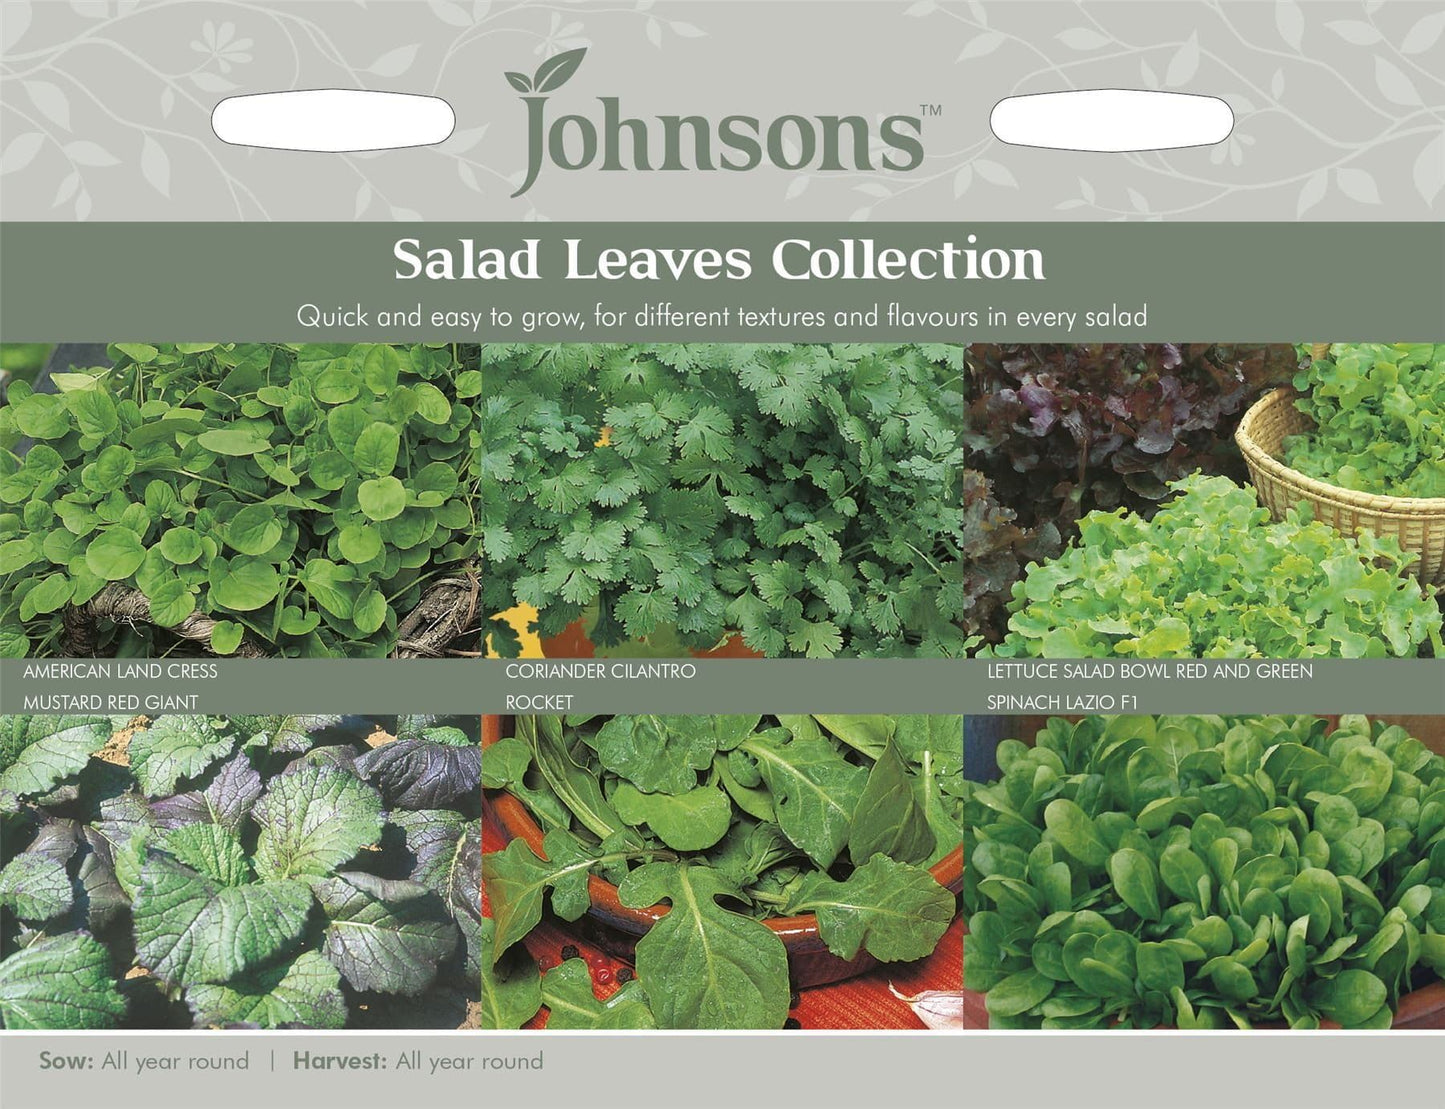 Johnsons Salad Leaves Collection